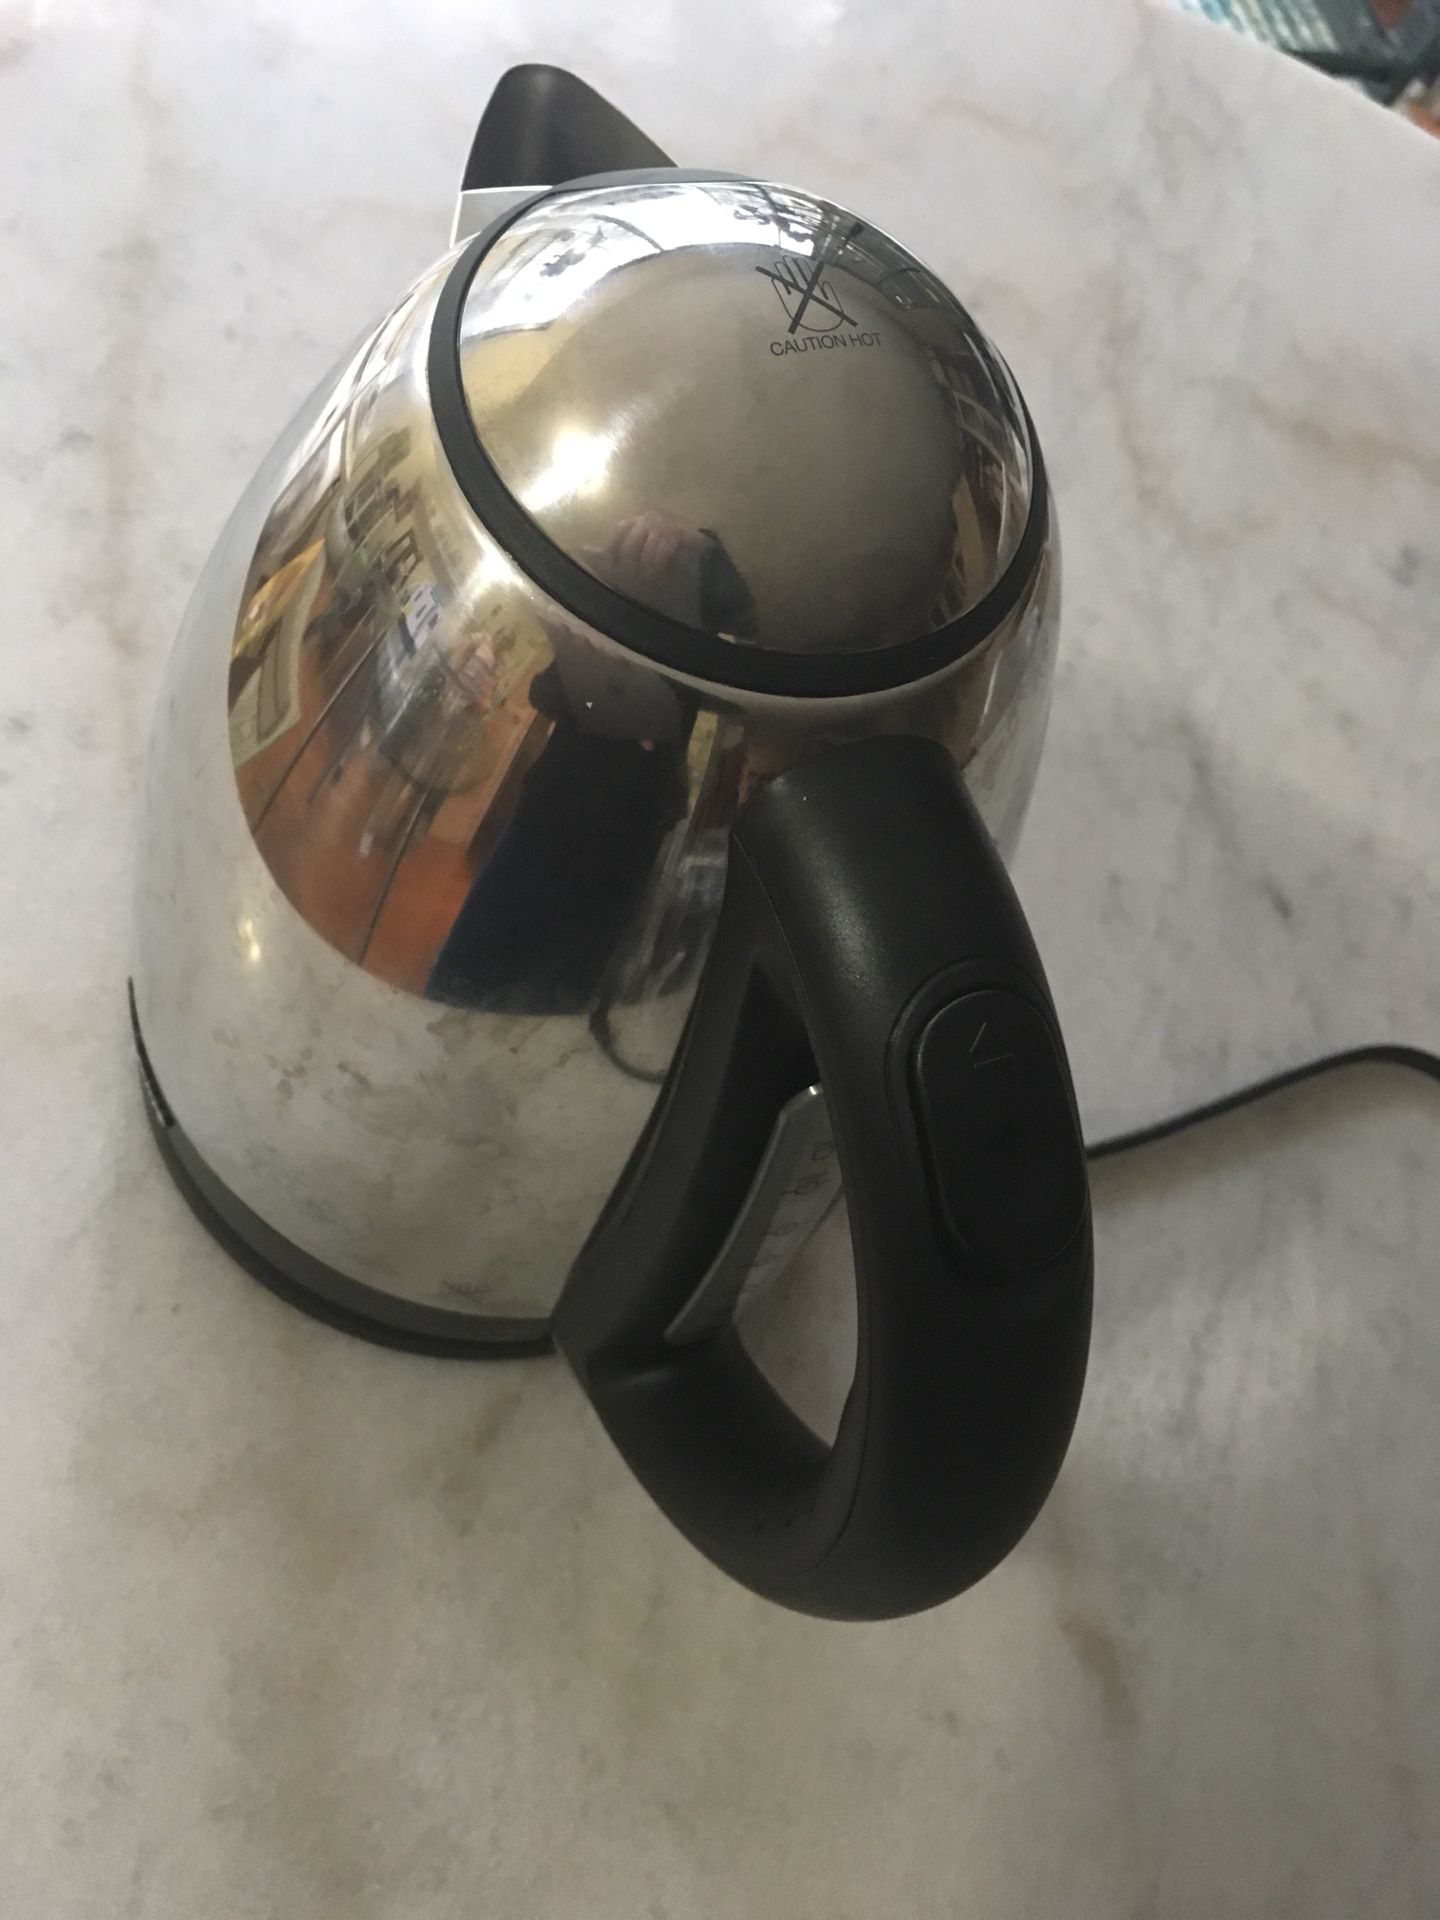 AROMA electric kettle $5. Very GOOD condition!!!